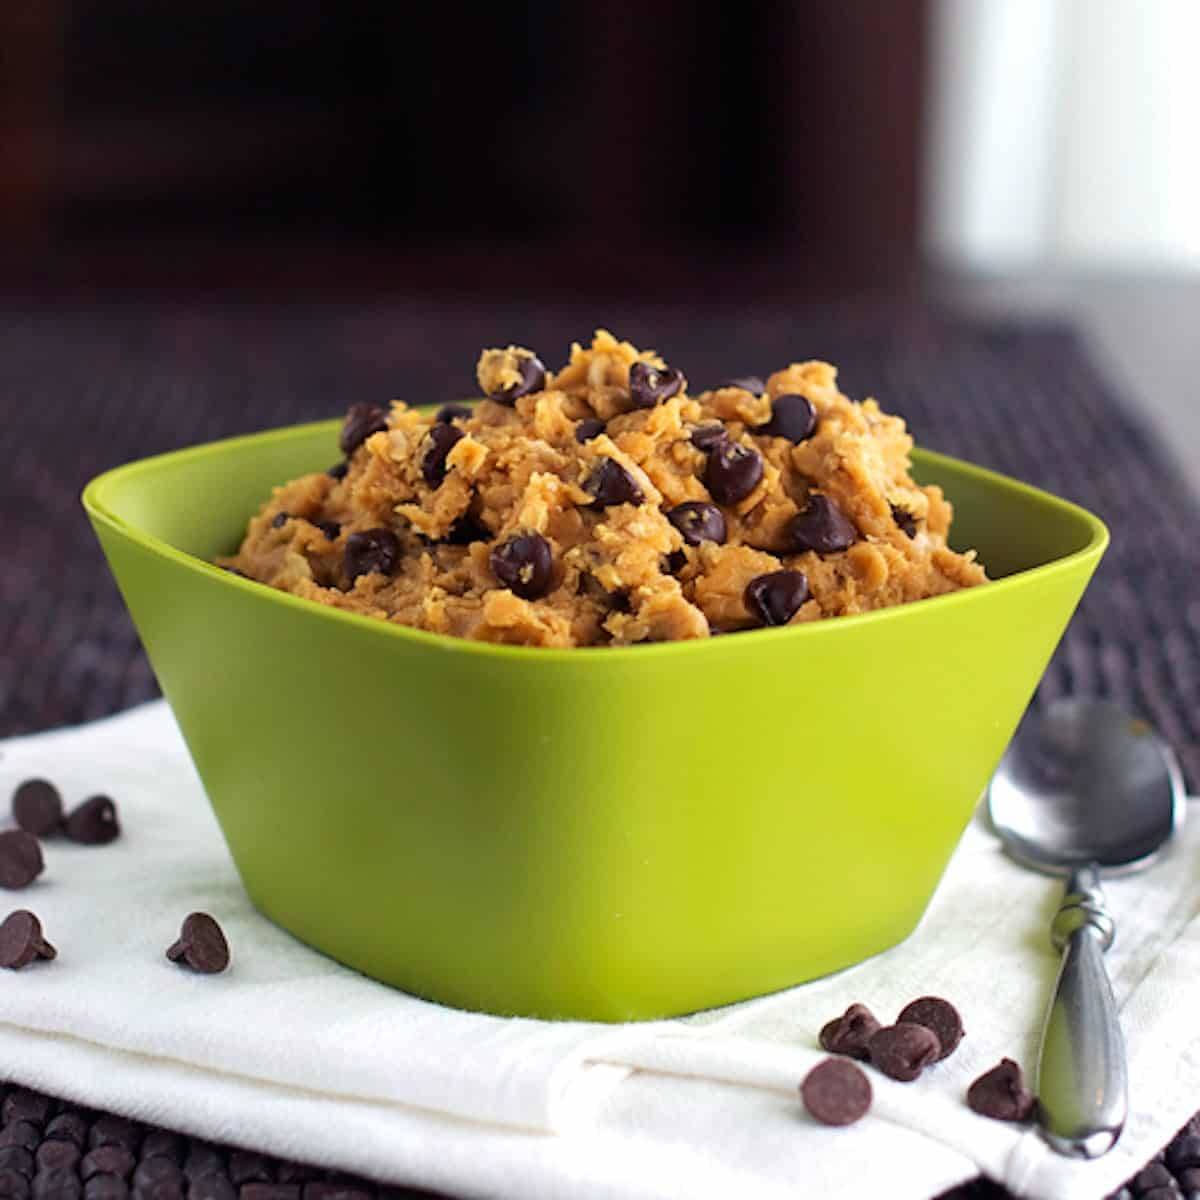 Chocolate chip peanut butter healthy cookie dough in a green bowl with a spoon.